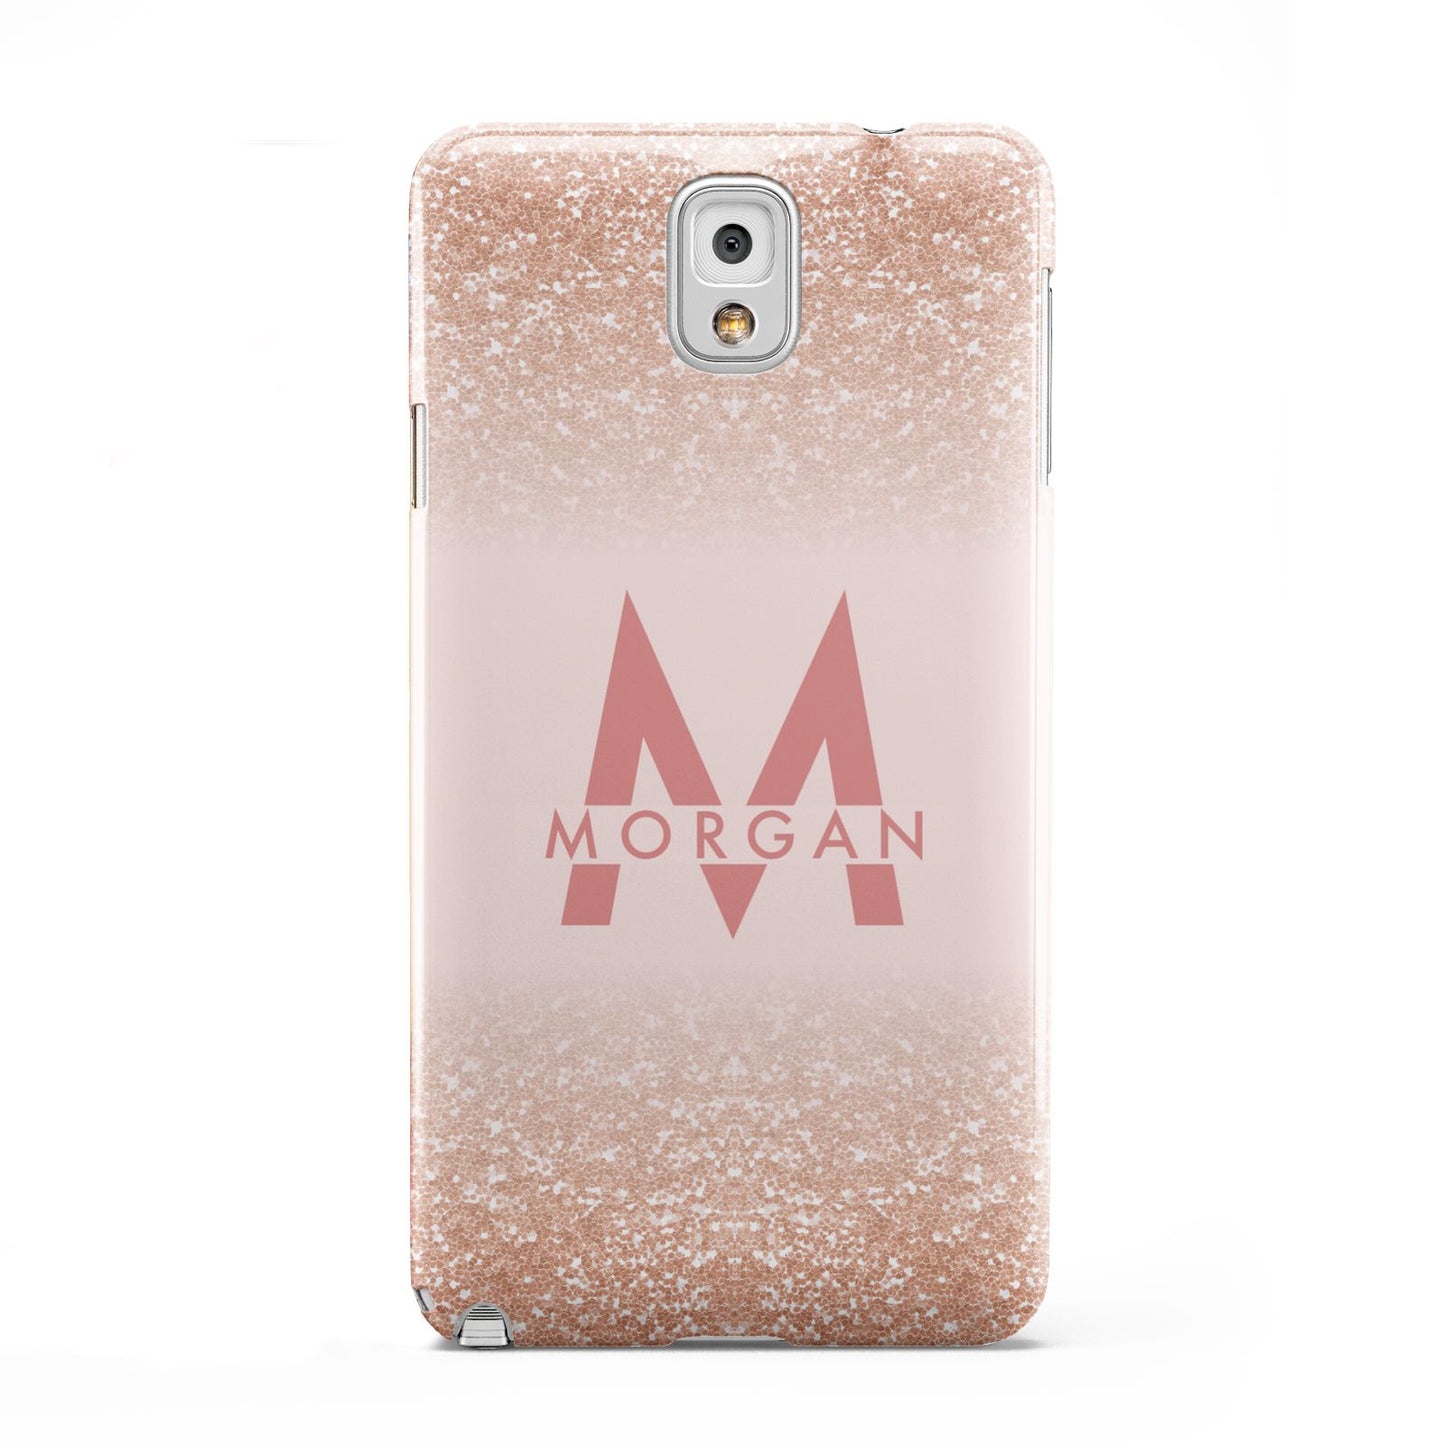 Personalised Printed Glitter Name Initials Samsung Galaxy Note 3 Case